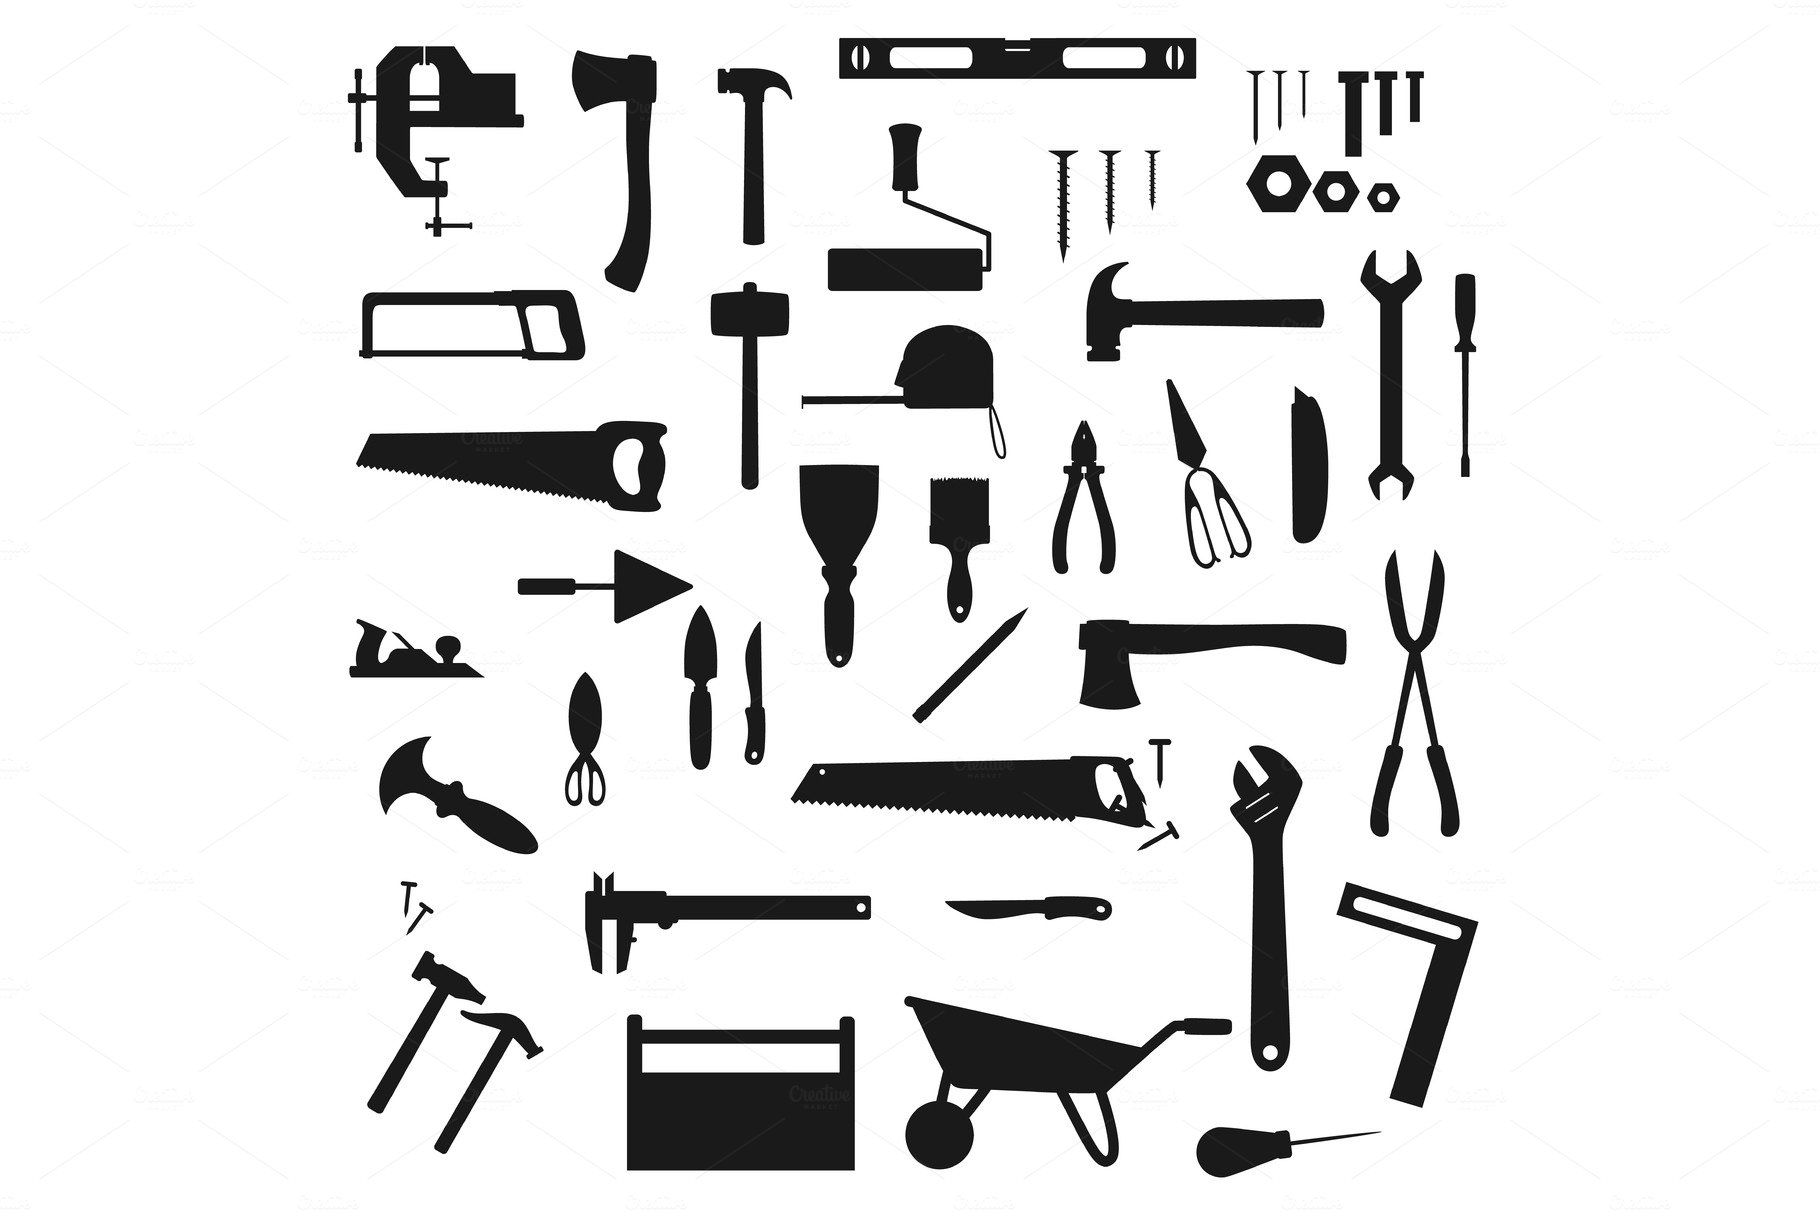 Work tools silhouettes cover image.